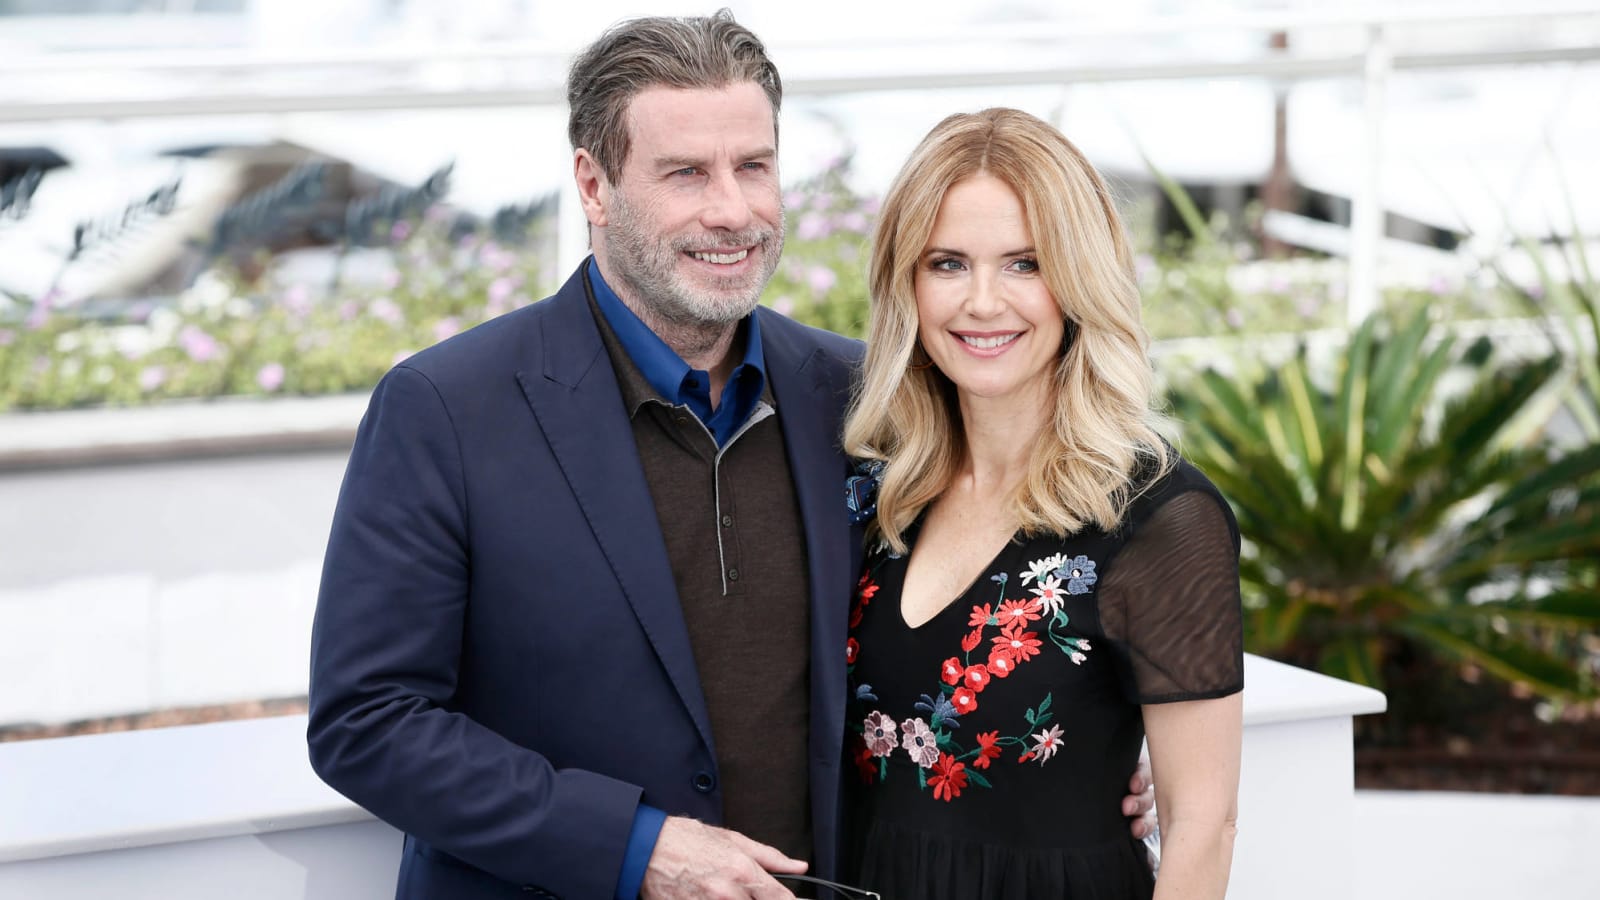 John Travolta discusses grieving for wife Kelly Preston: 'Mourning is something personal'